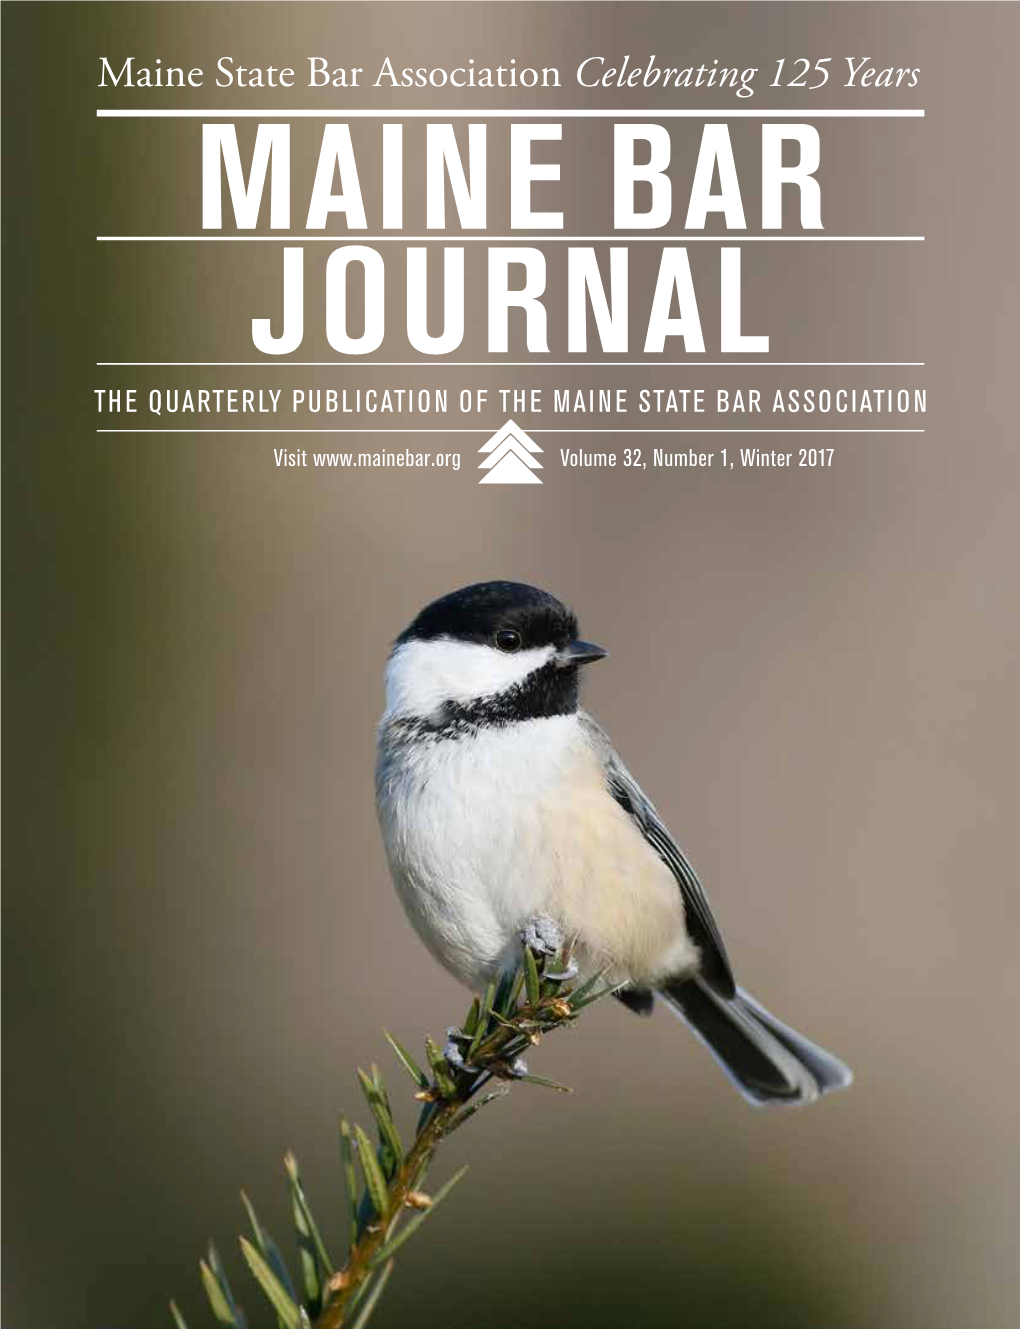 Maine State Bar Association Celebrating 125 Years MAINE BAR JOURNAL the QUARTERLY PUBLICATION of the MAINE STATE BAR ASSOCIATION